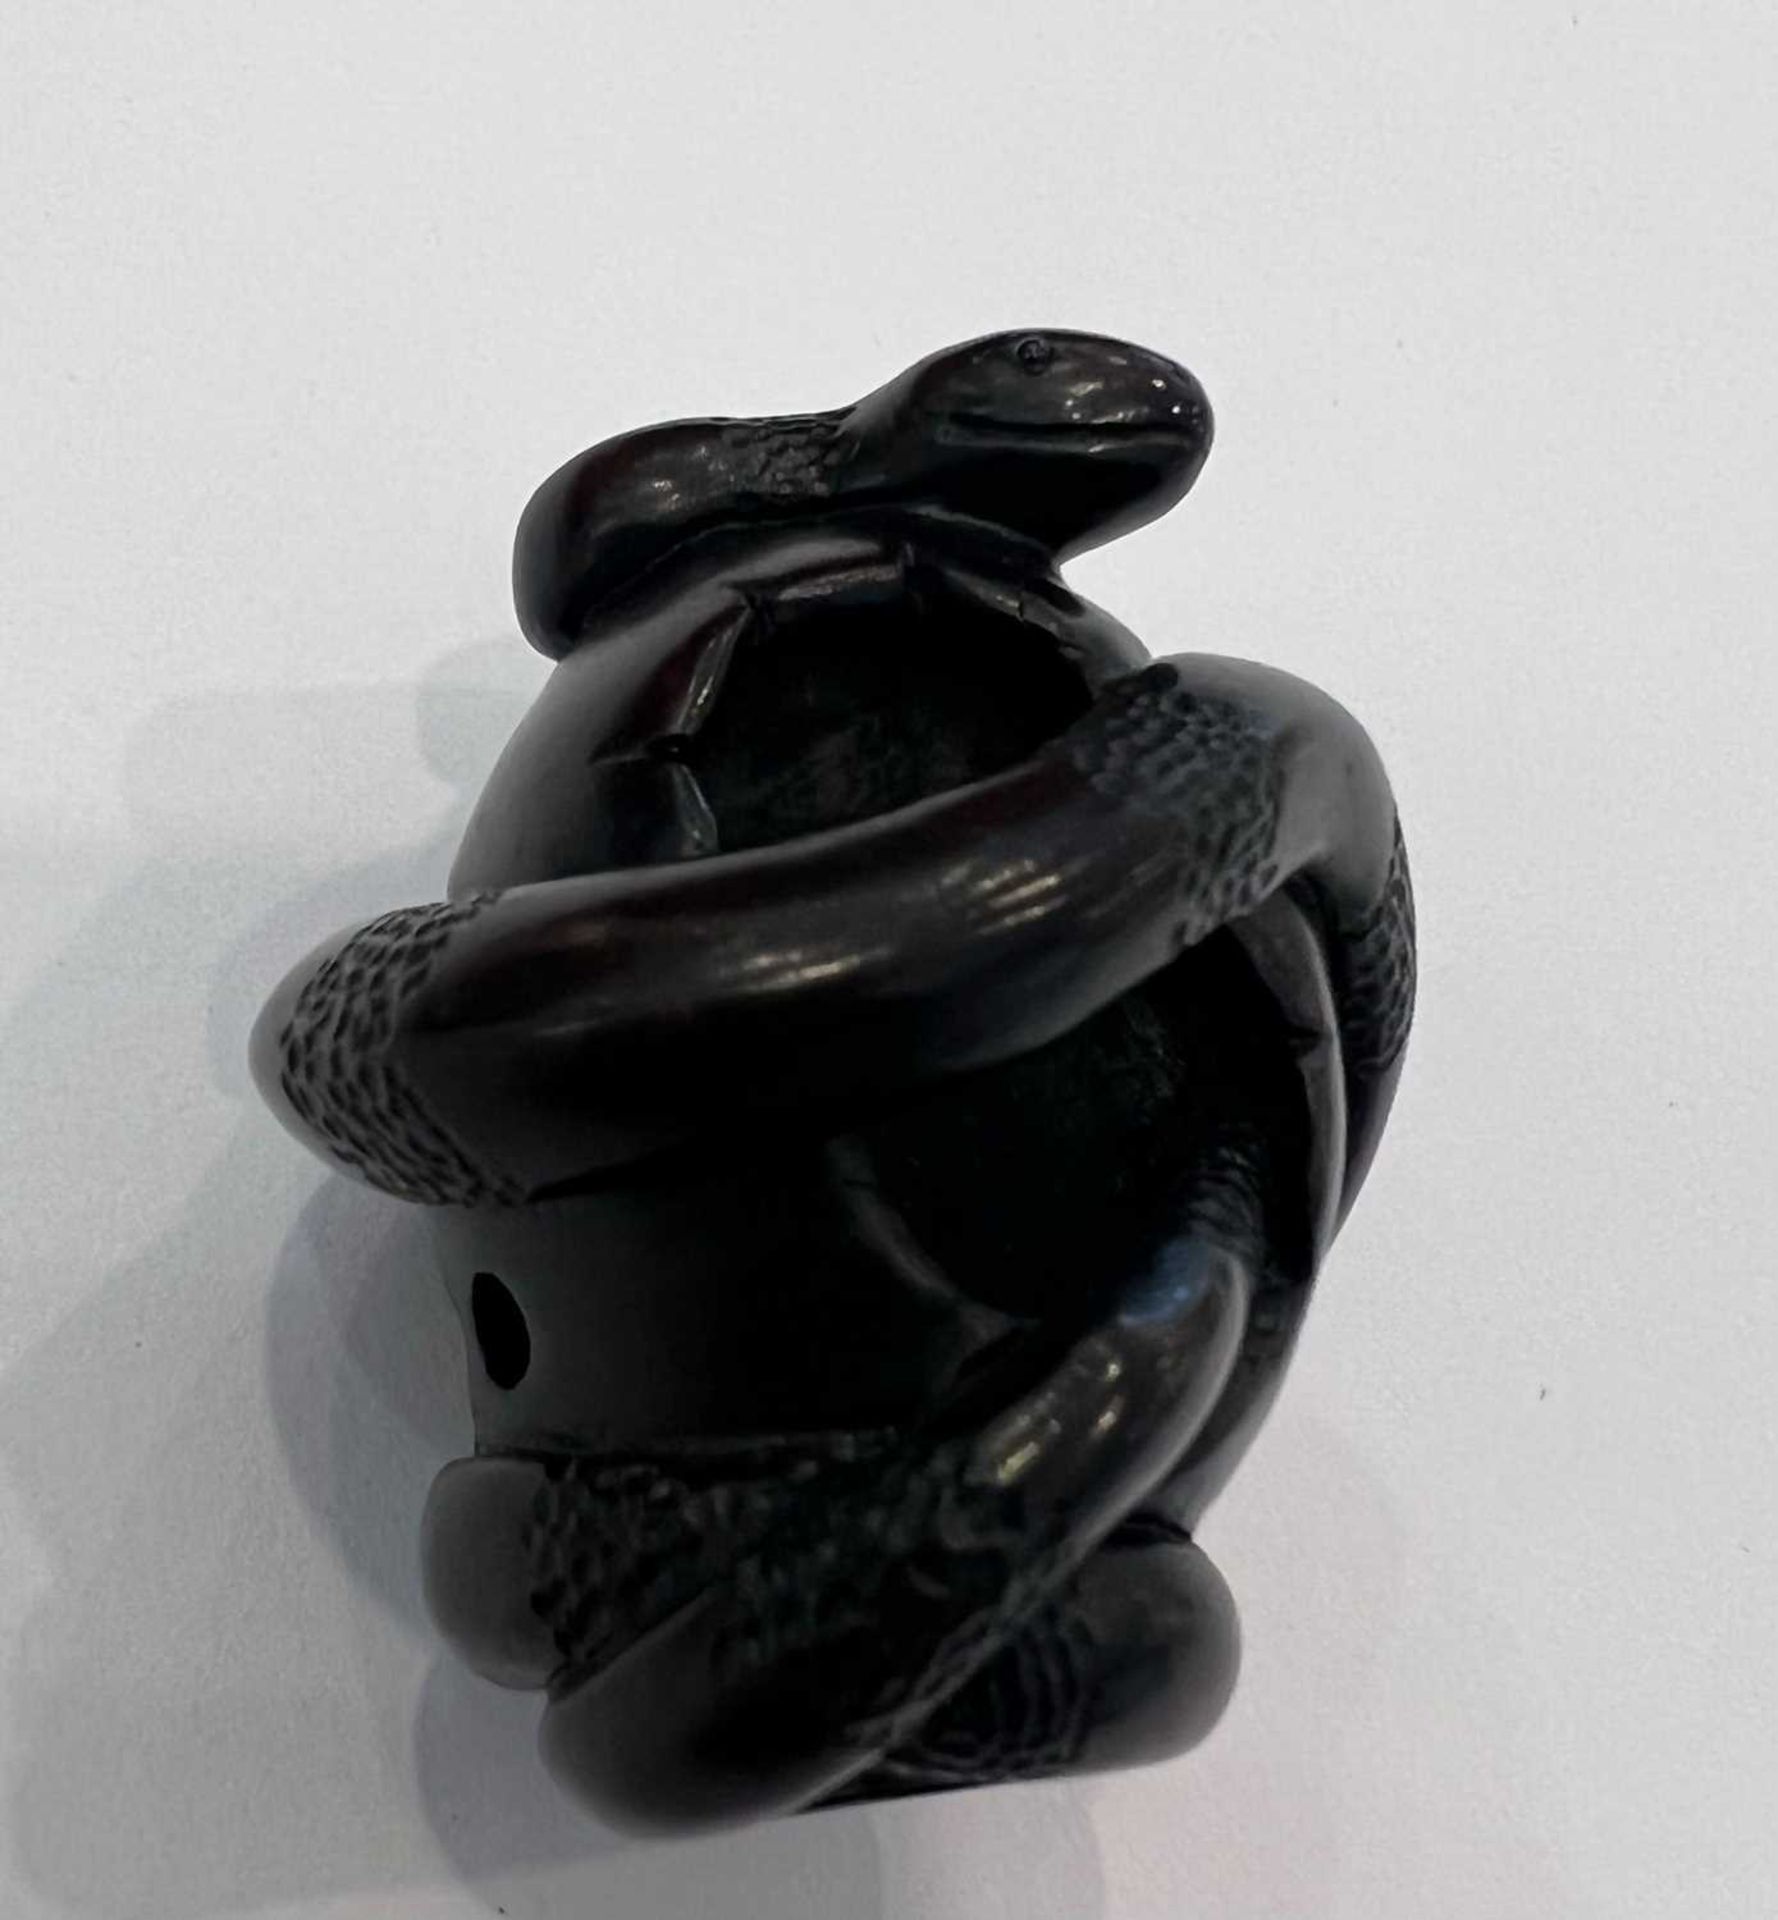 A CARVED WOOD NETSUKE IN THE FORM OF A SNAKE - Image 4 of 4